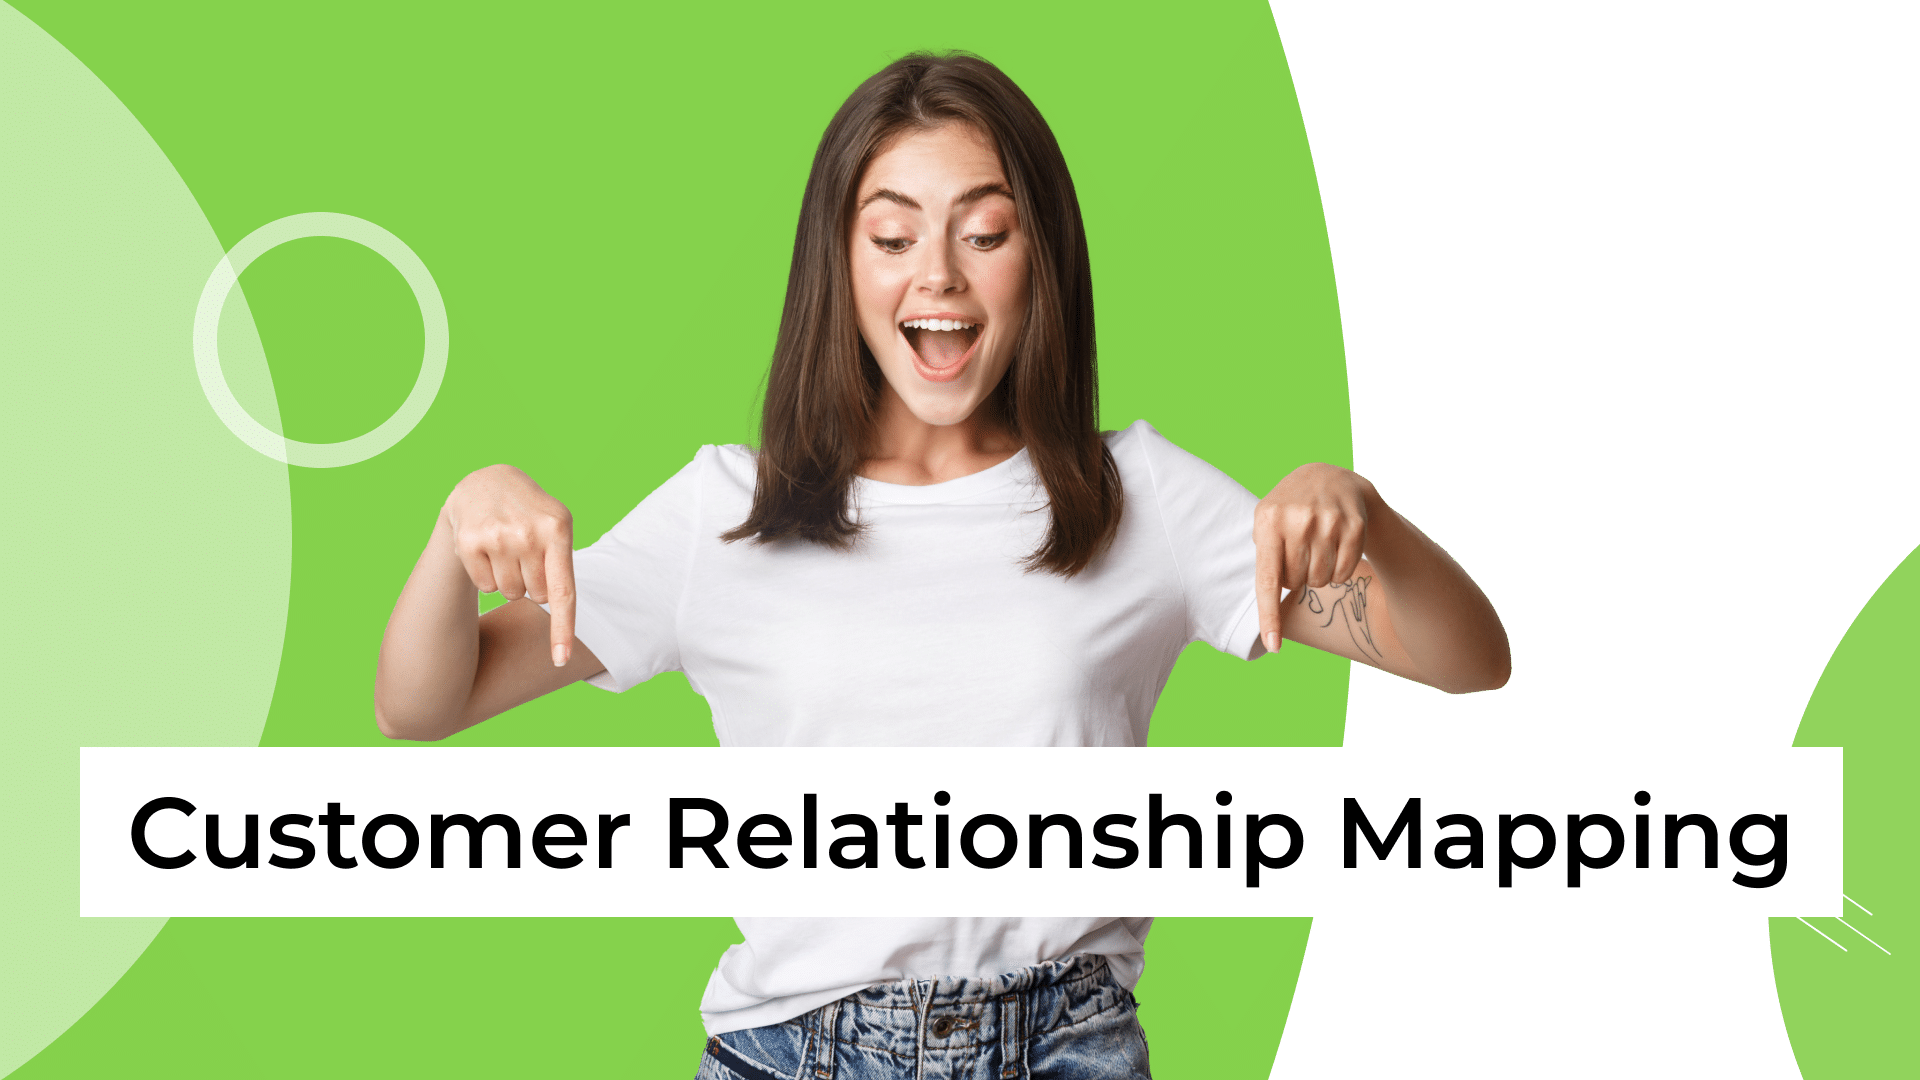 What Is Customer Relationship Mapping & How to Do It Right?